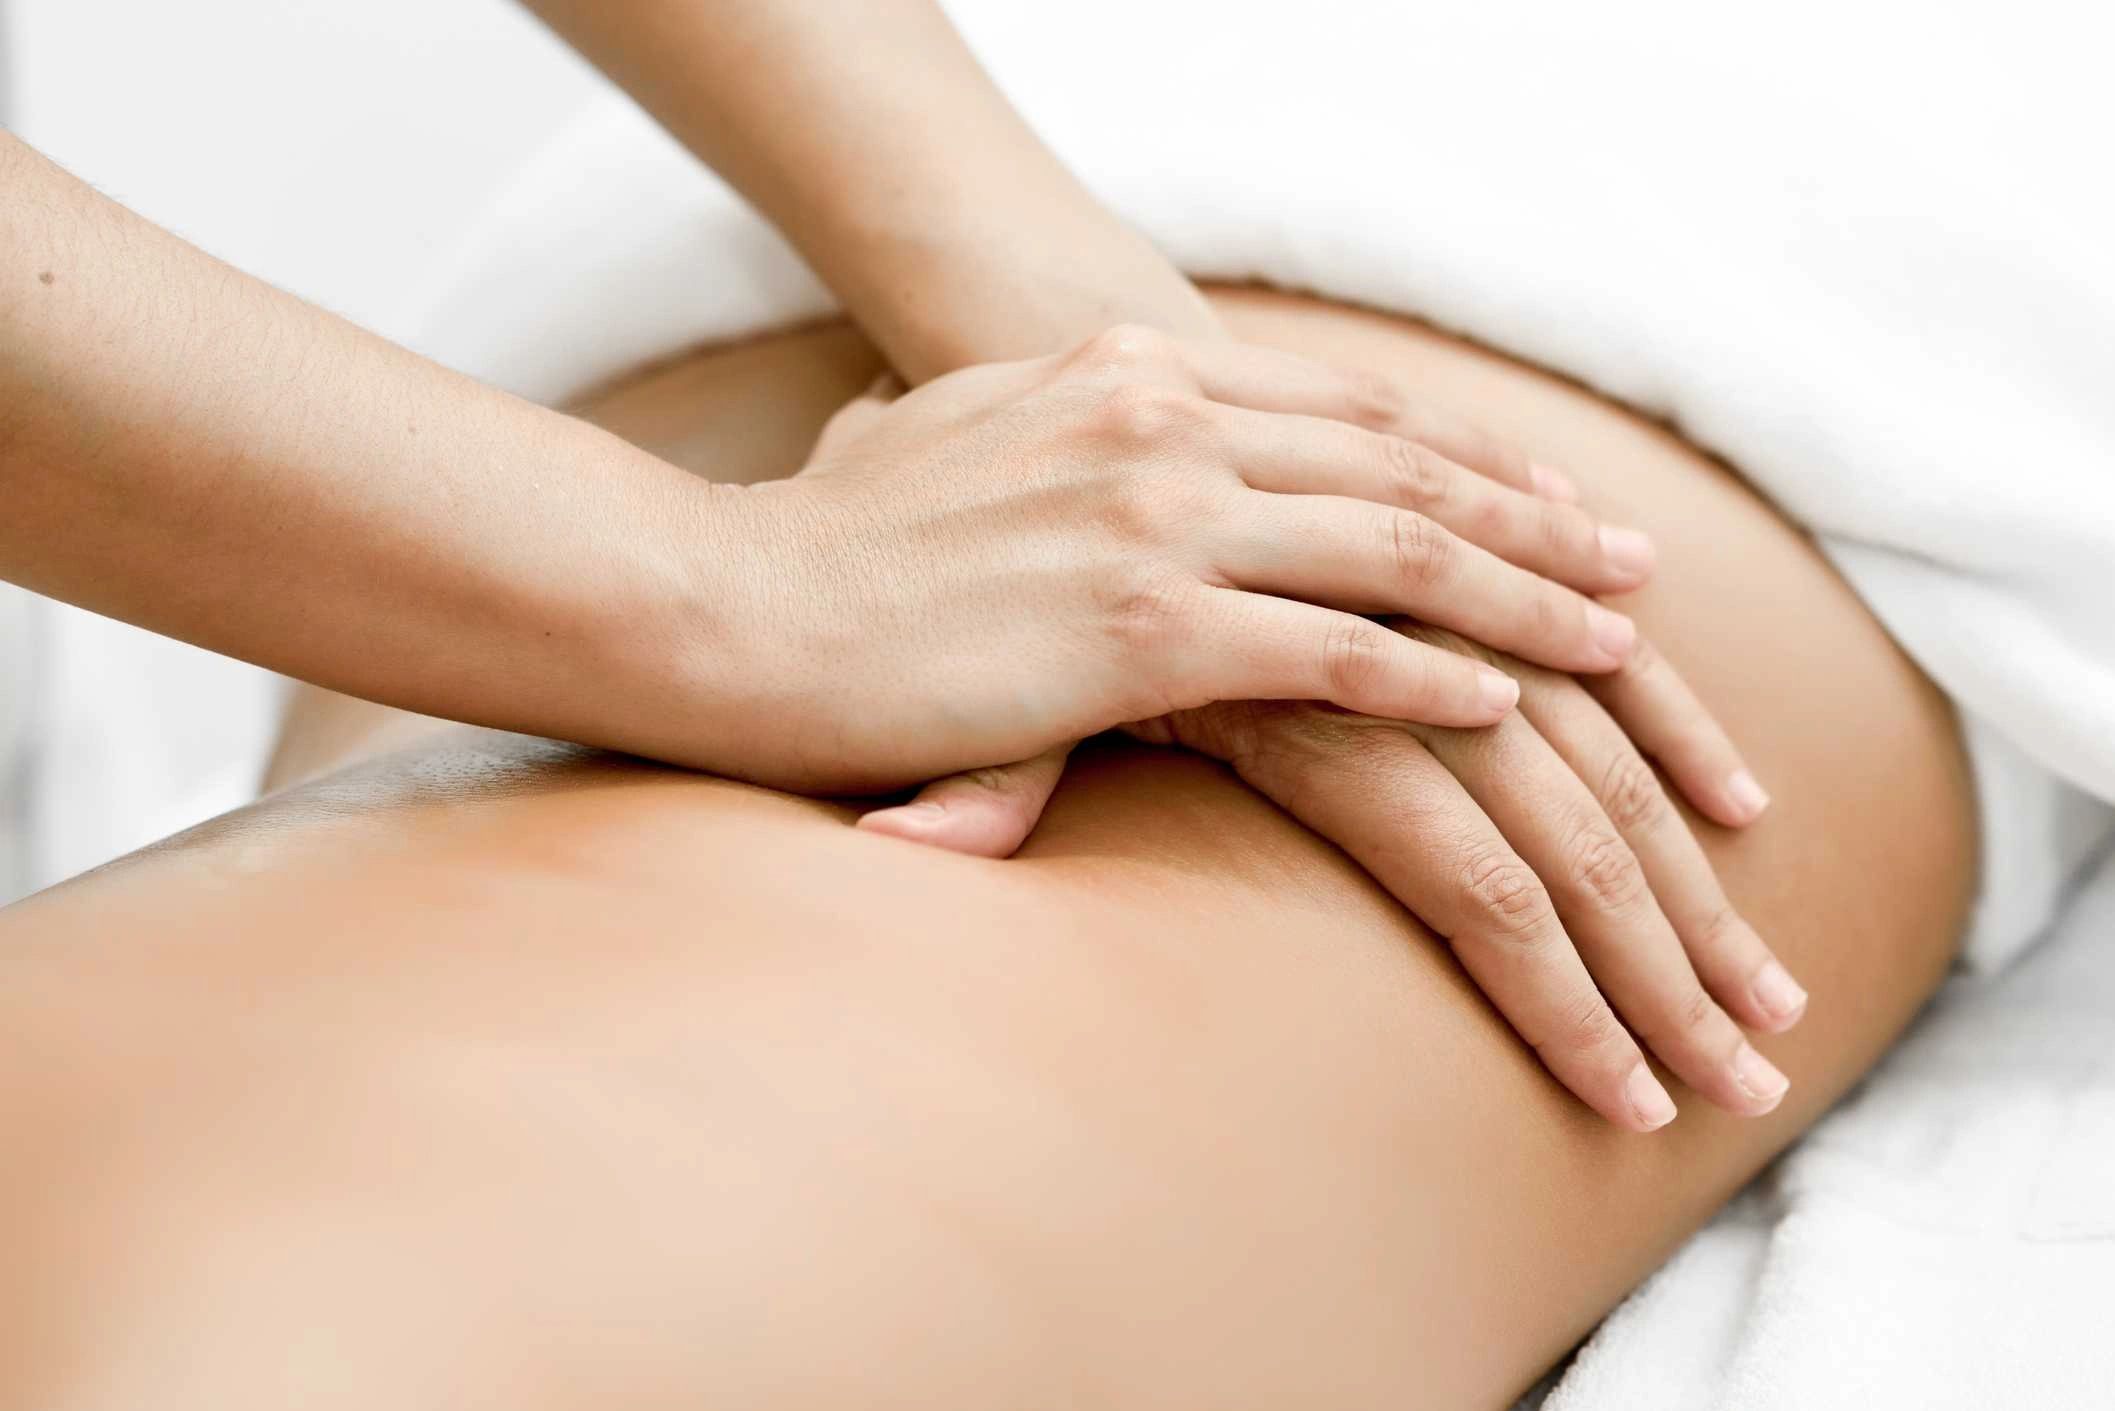 Hands are shown giving a relaxing back massage with oil